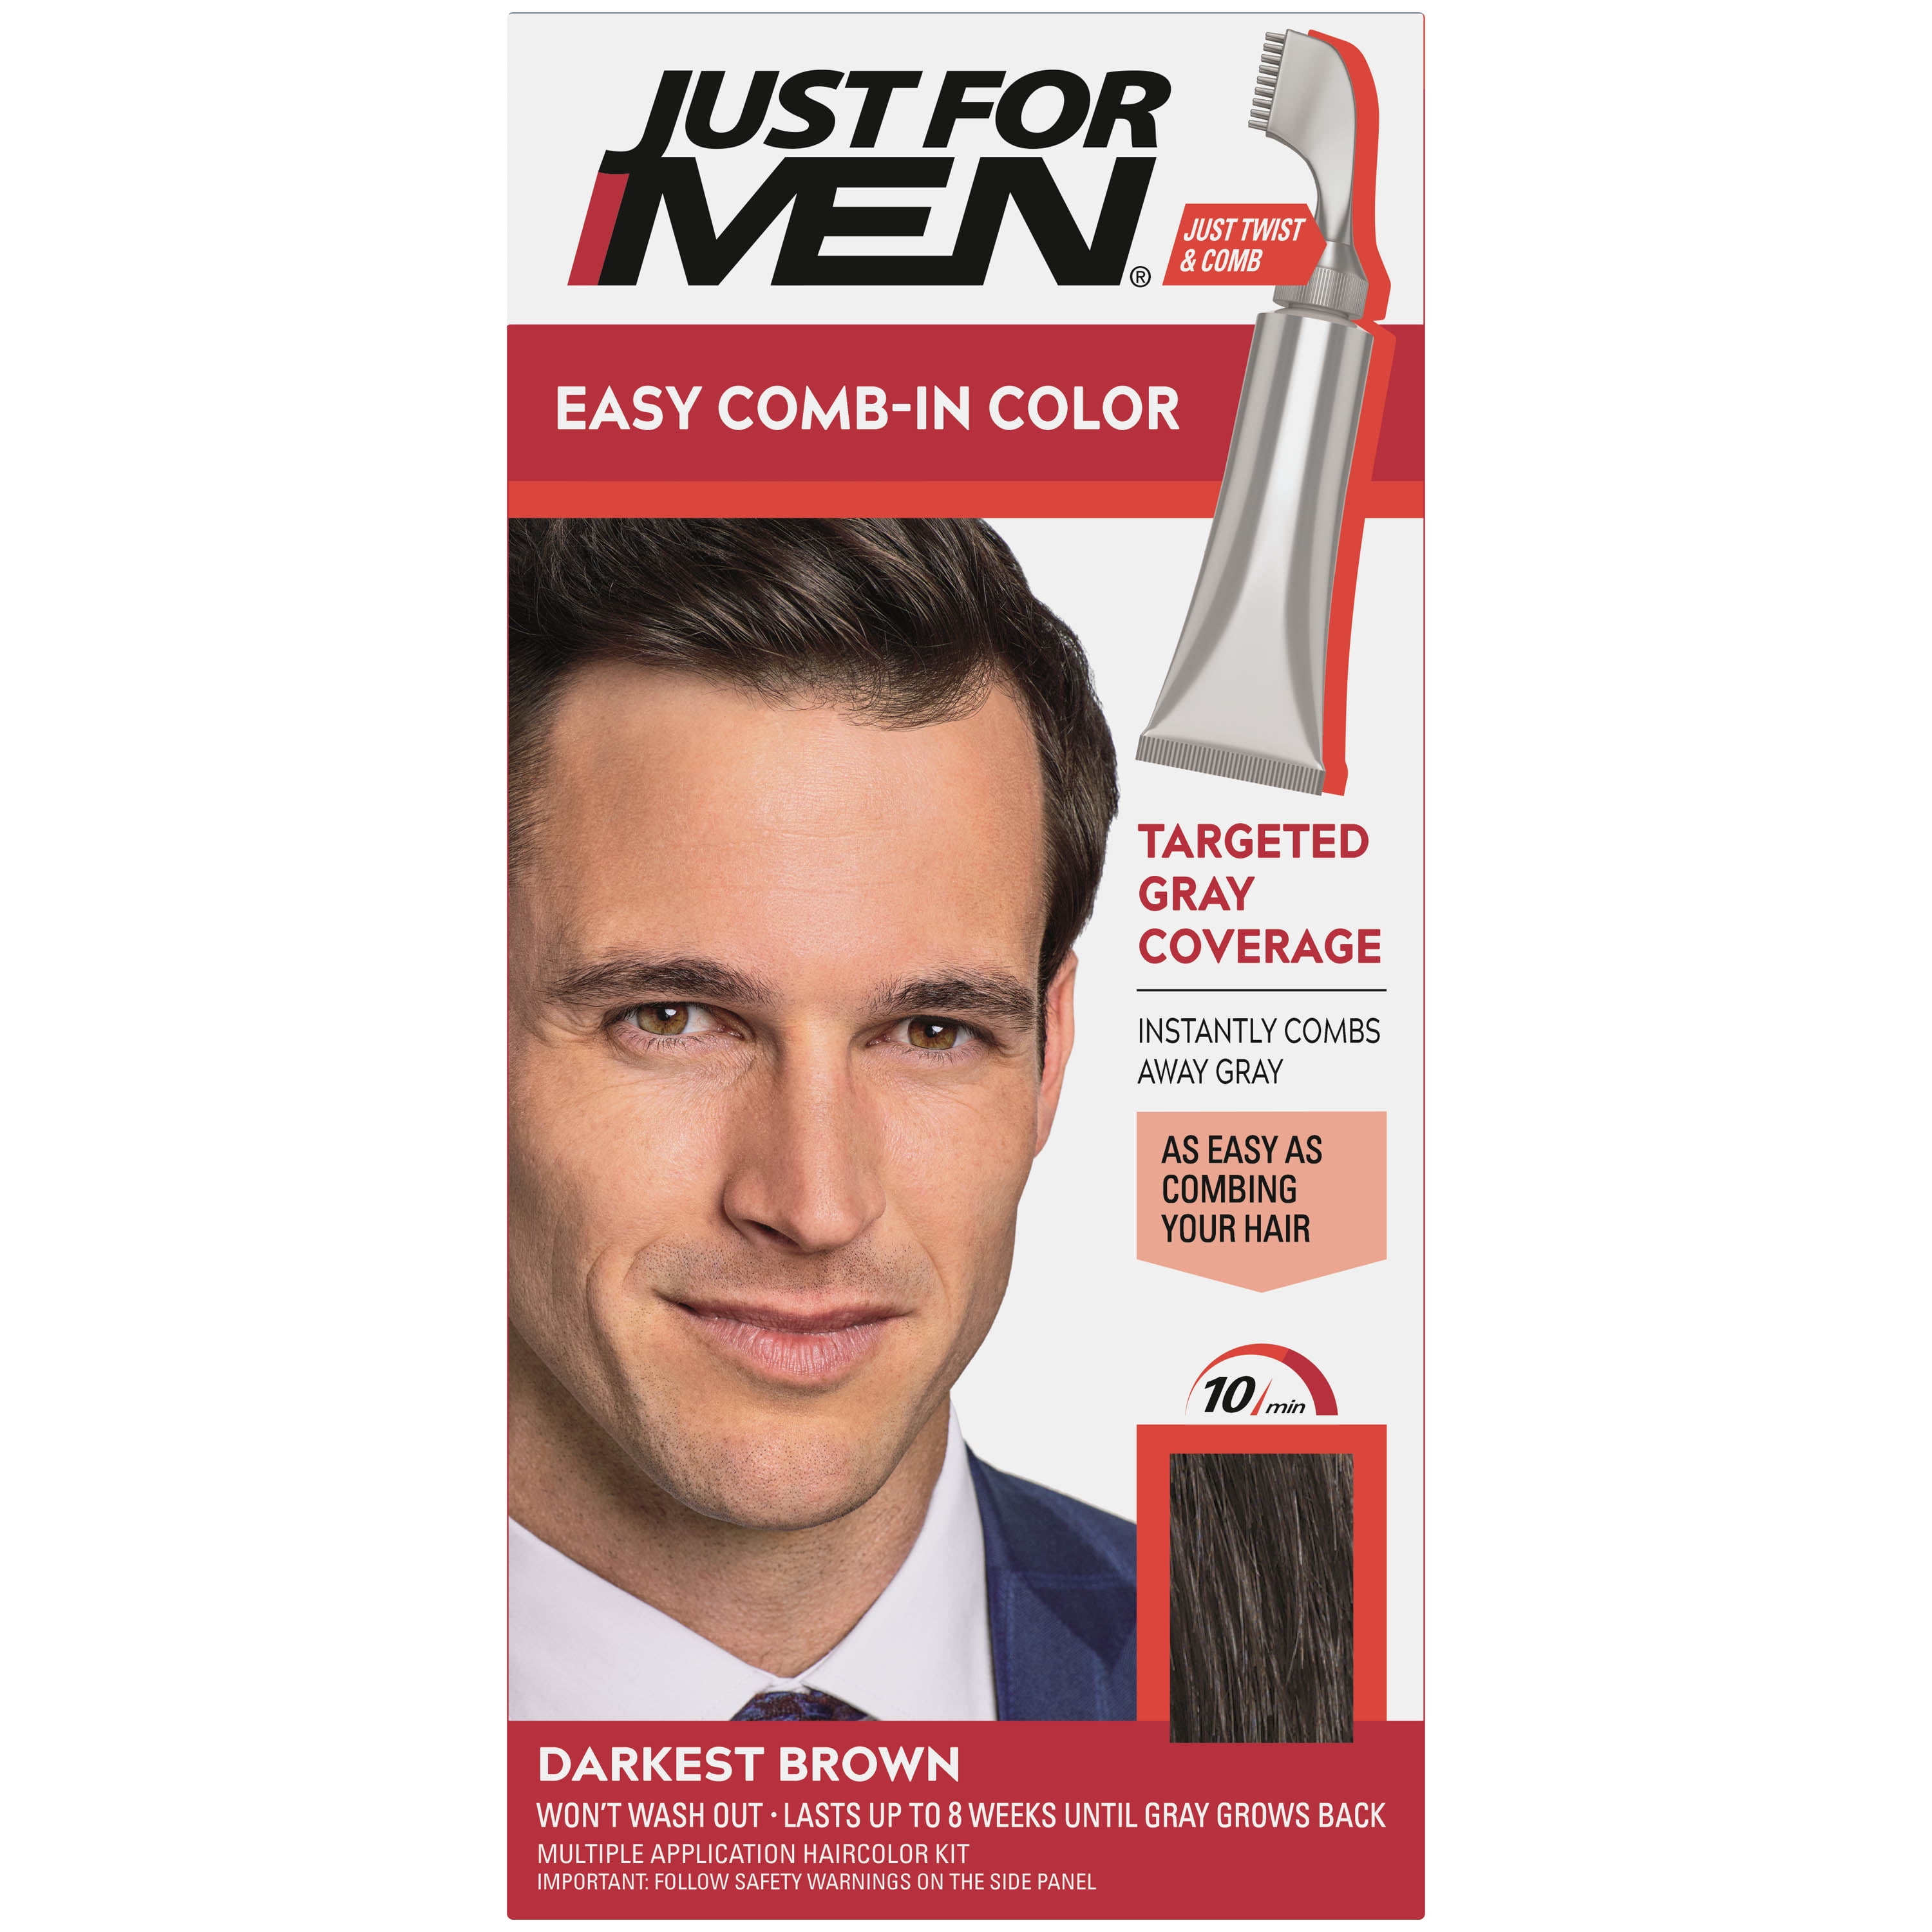 Just For Men Easy Comb-in Gray Hair Color with Applicator, Darkest Brown,  A-50 